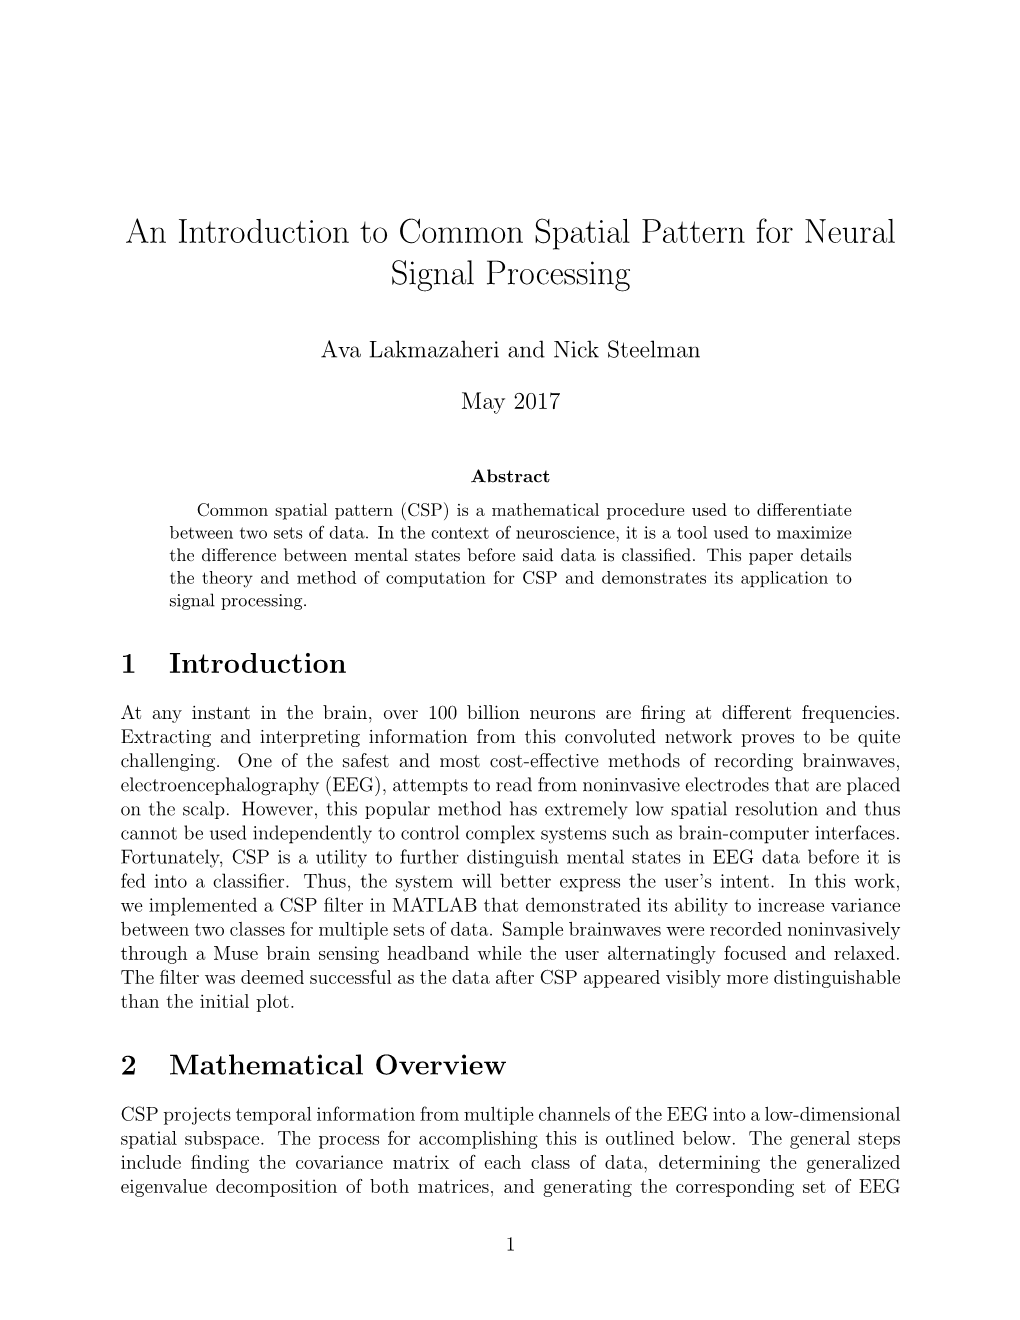 An Introduction to Common Spatial Pattern for Neural Signal Processing